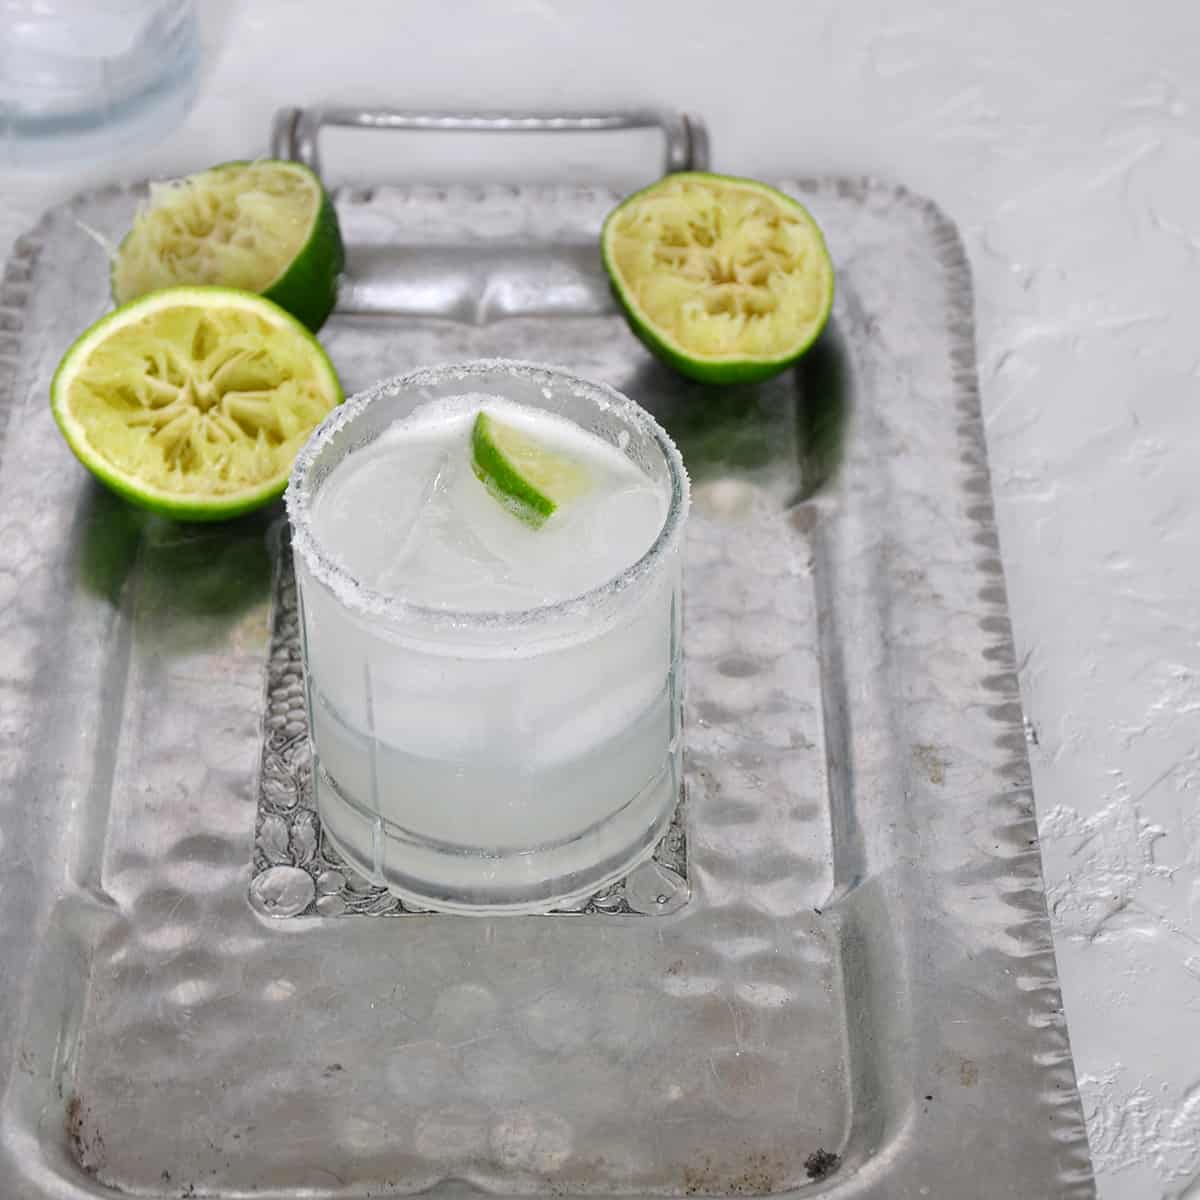 A classic margarita on a tray.